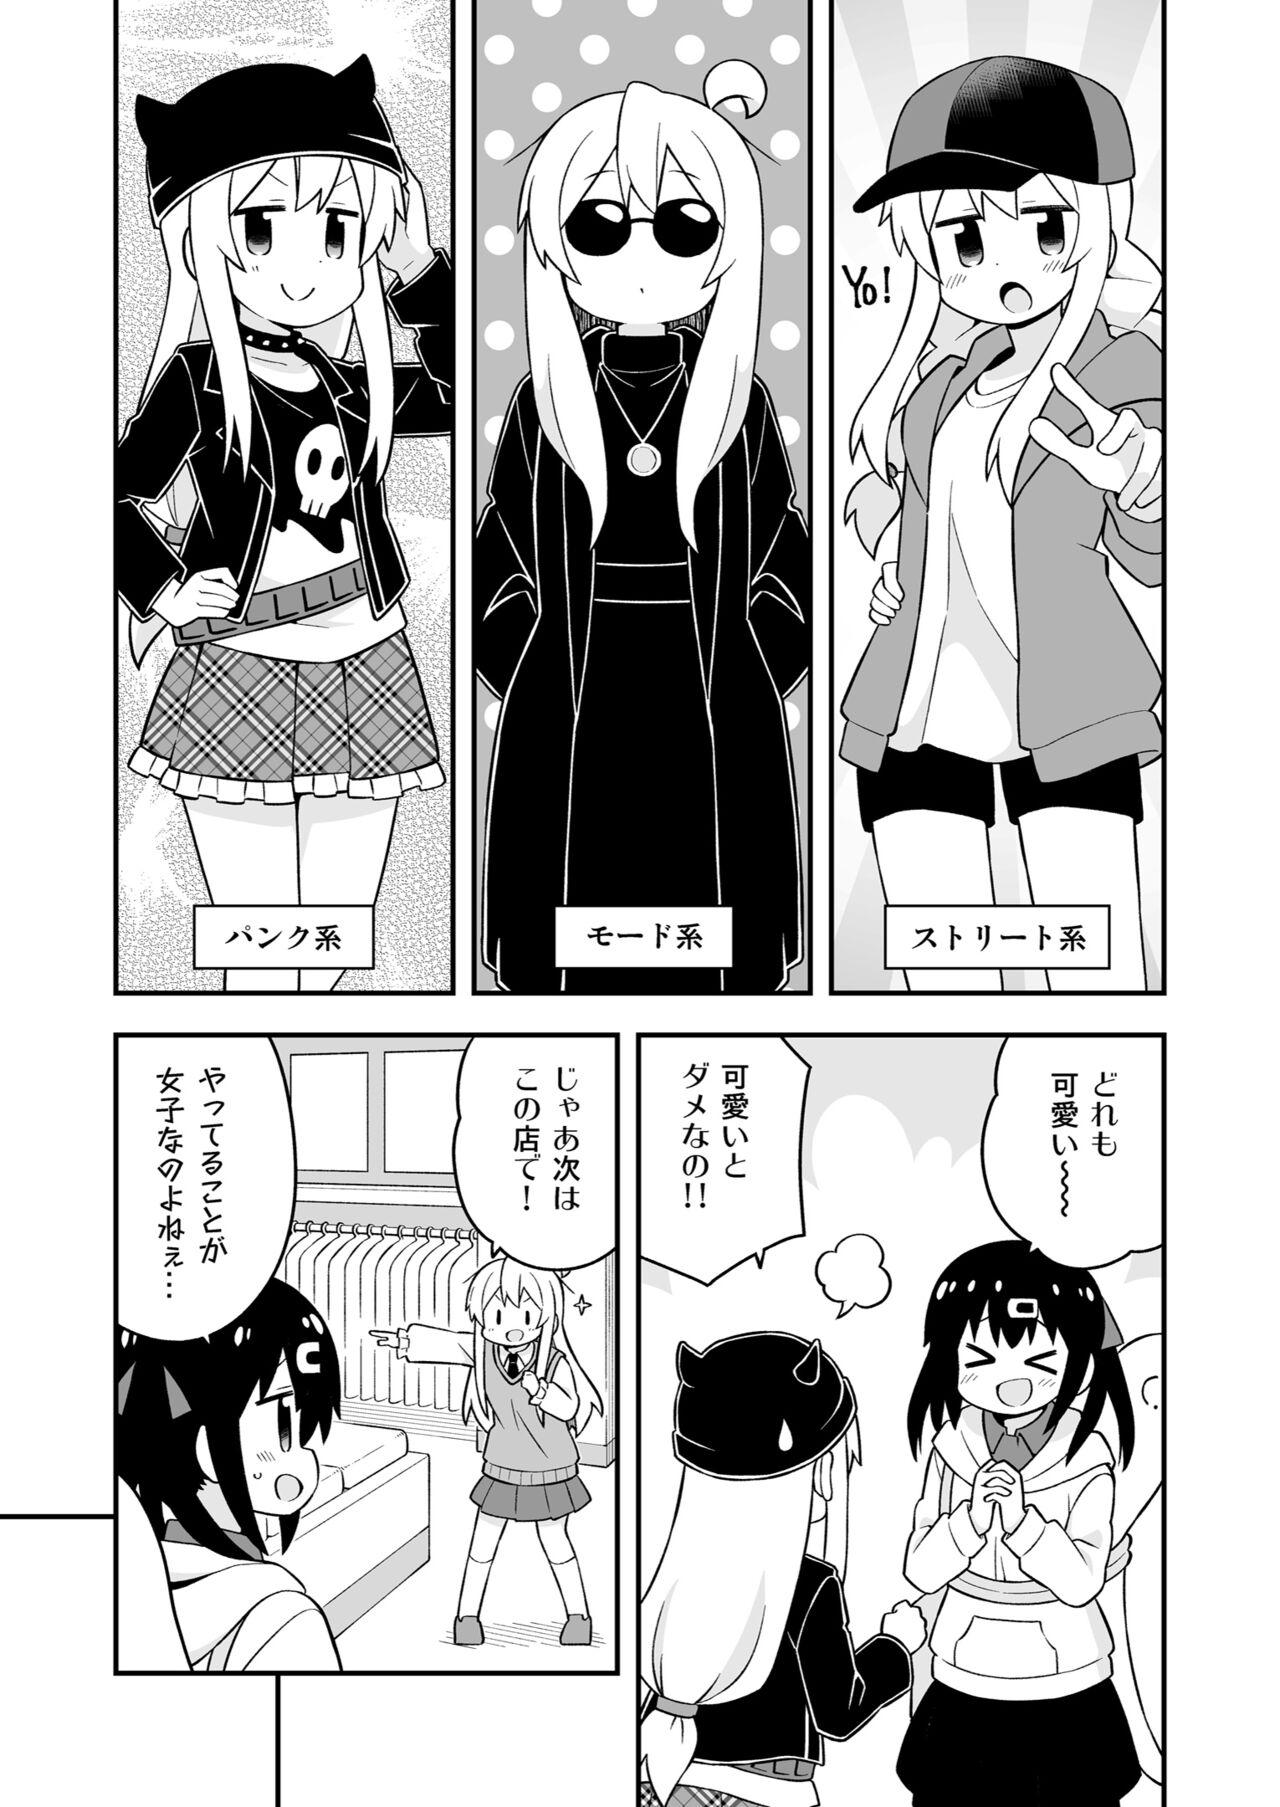 Long Onii-chan wa Oshimai! 23 - Onii chan wa oshimai Naturaltits - Page 9